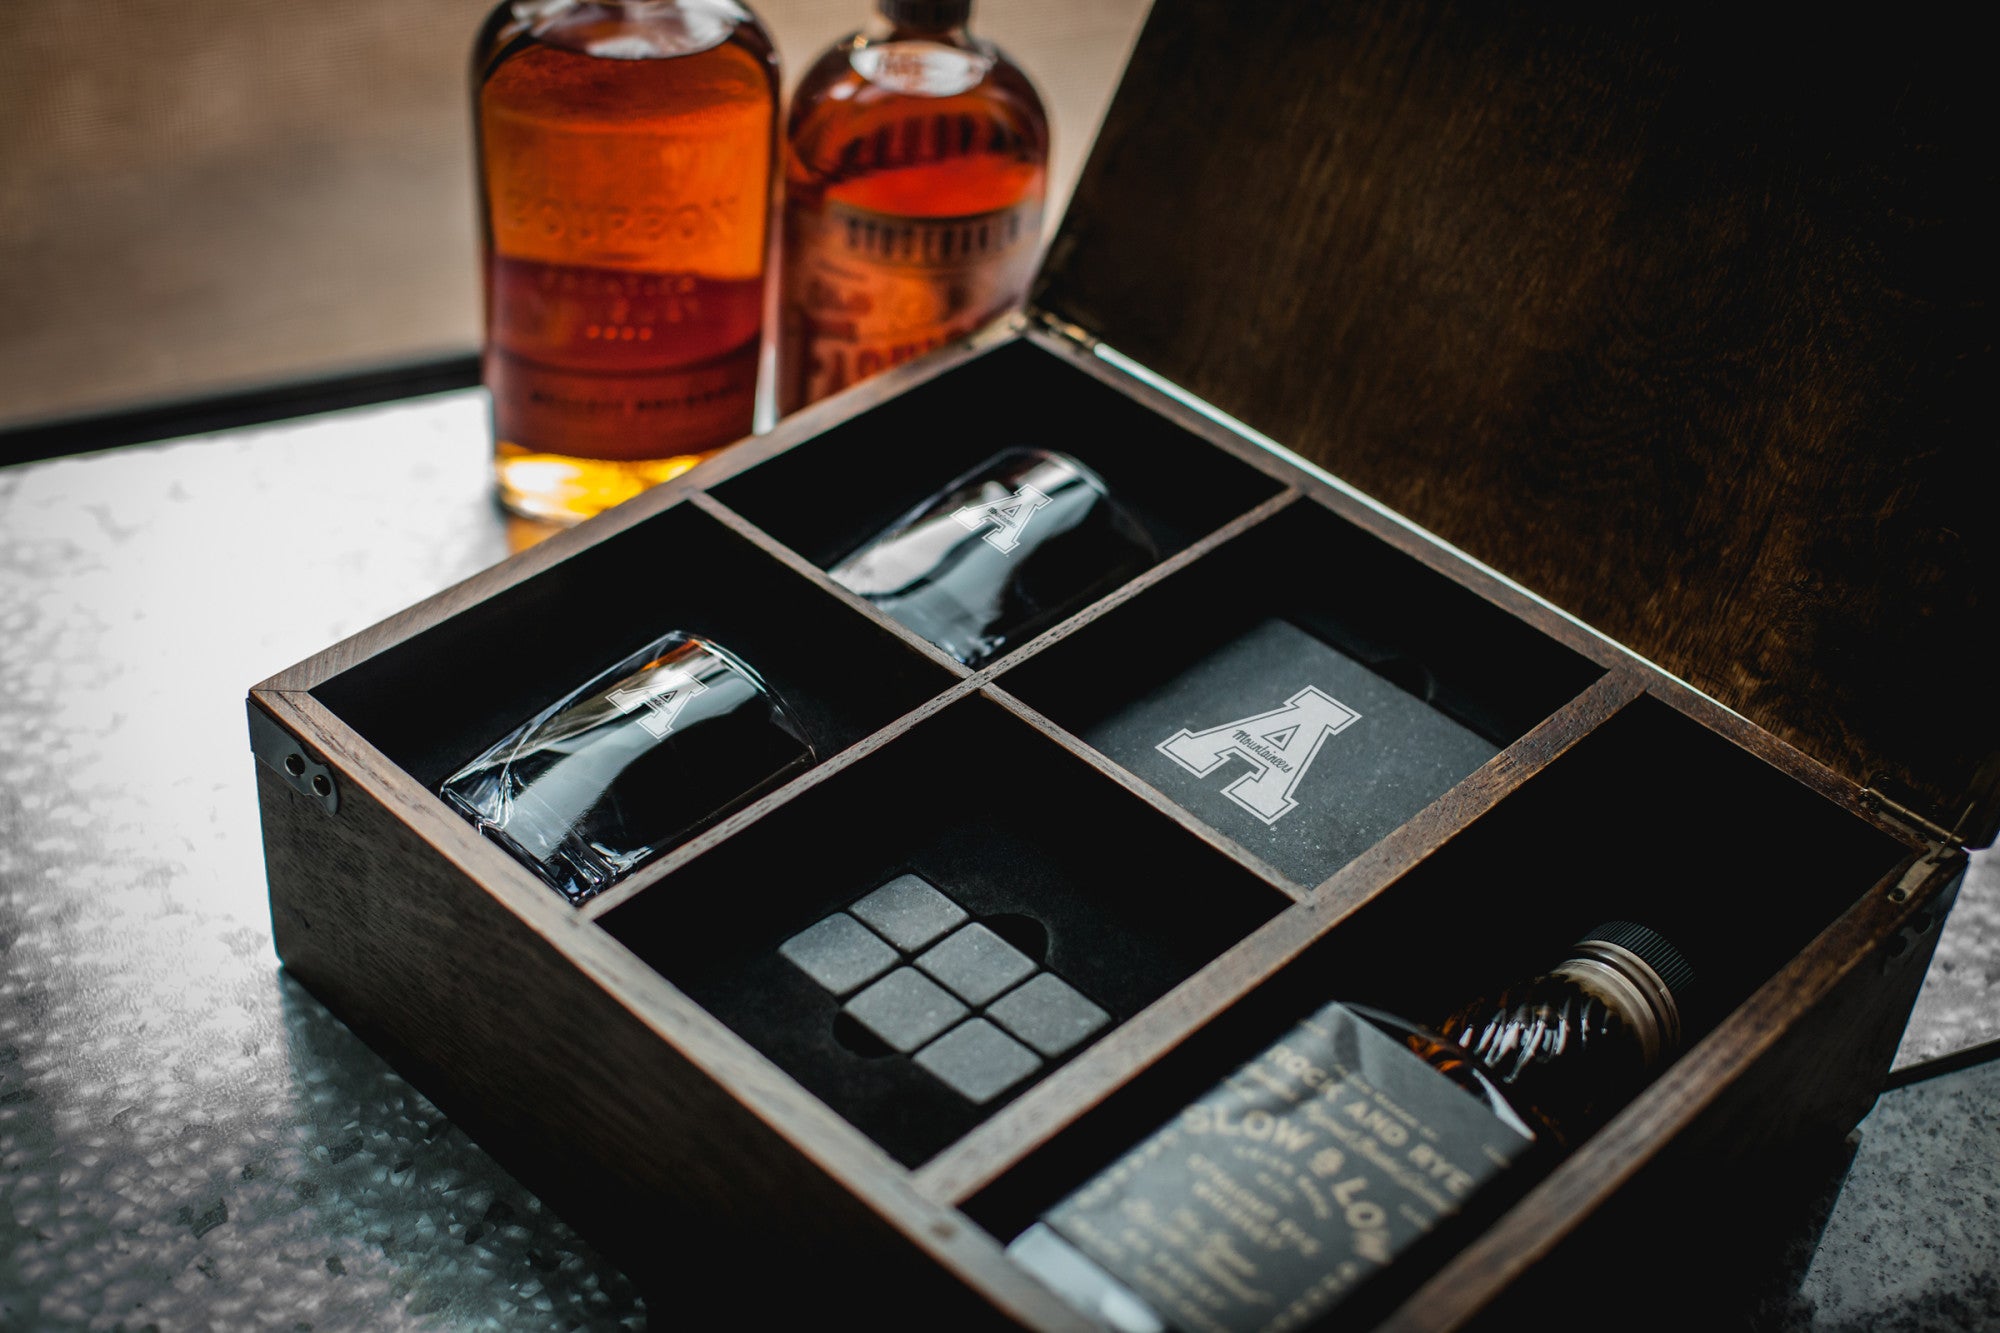 App State Mountaineers - Whiskey Box Gift Set